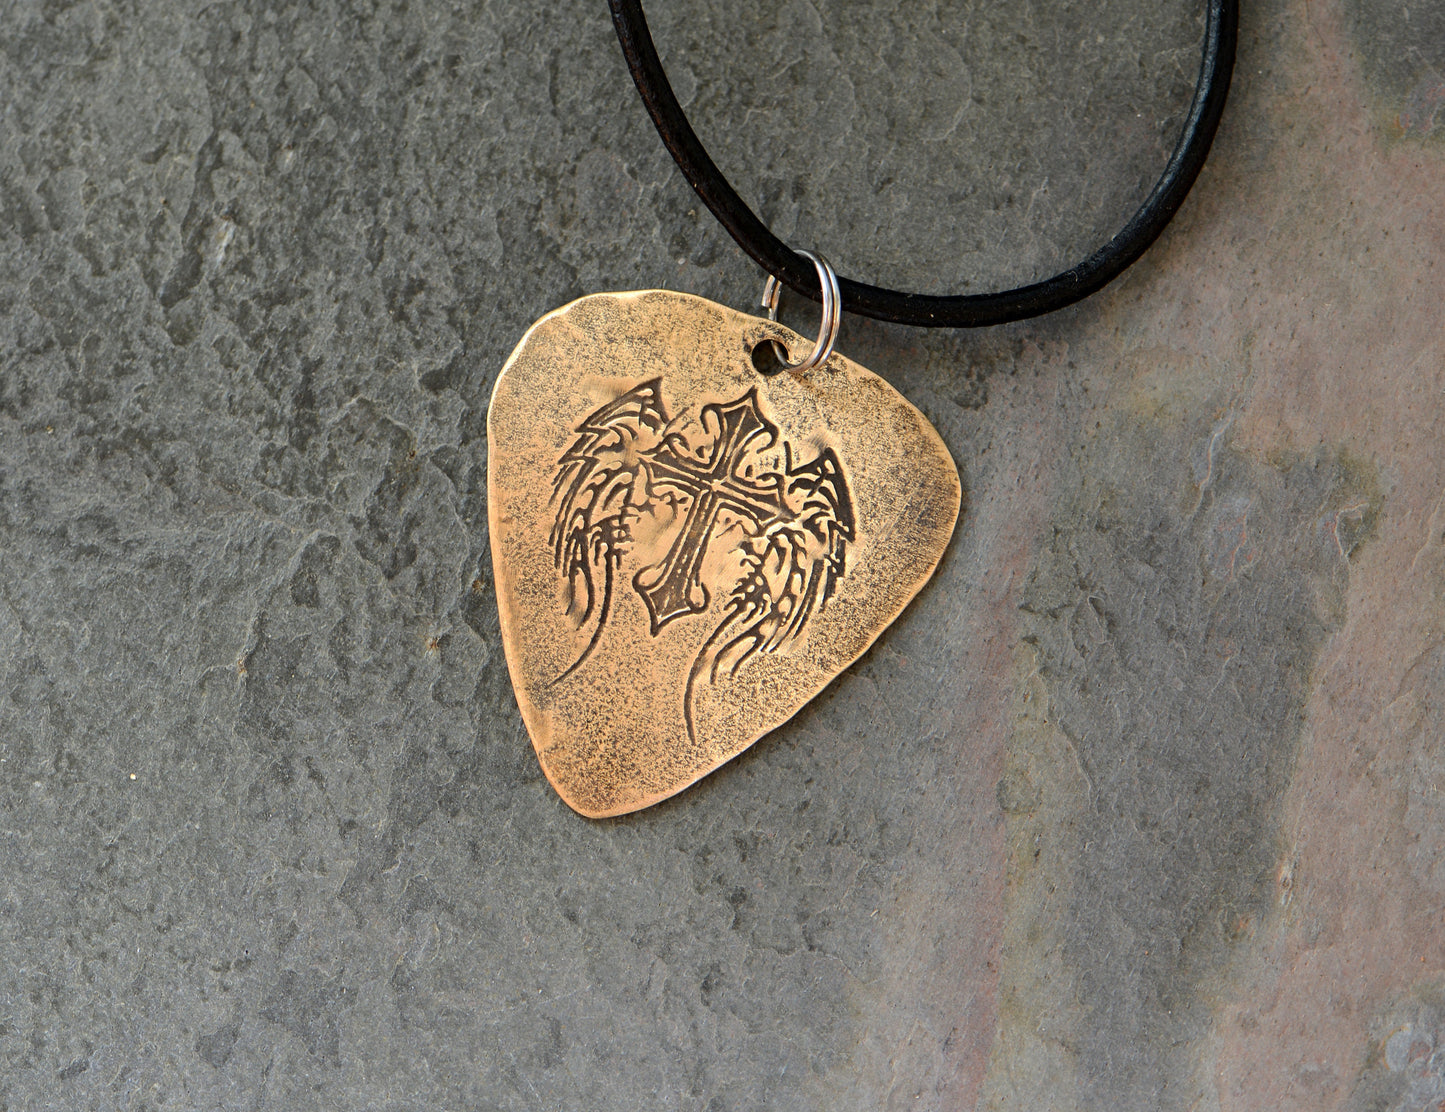 Winged cross on bronze guitar pick transformed into a necklace